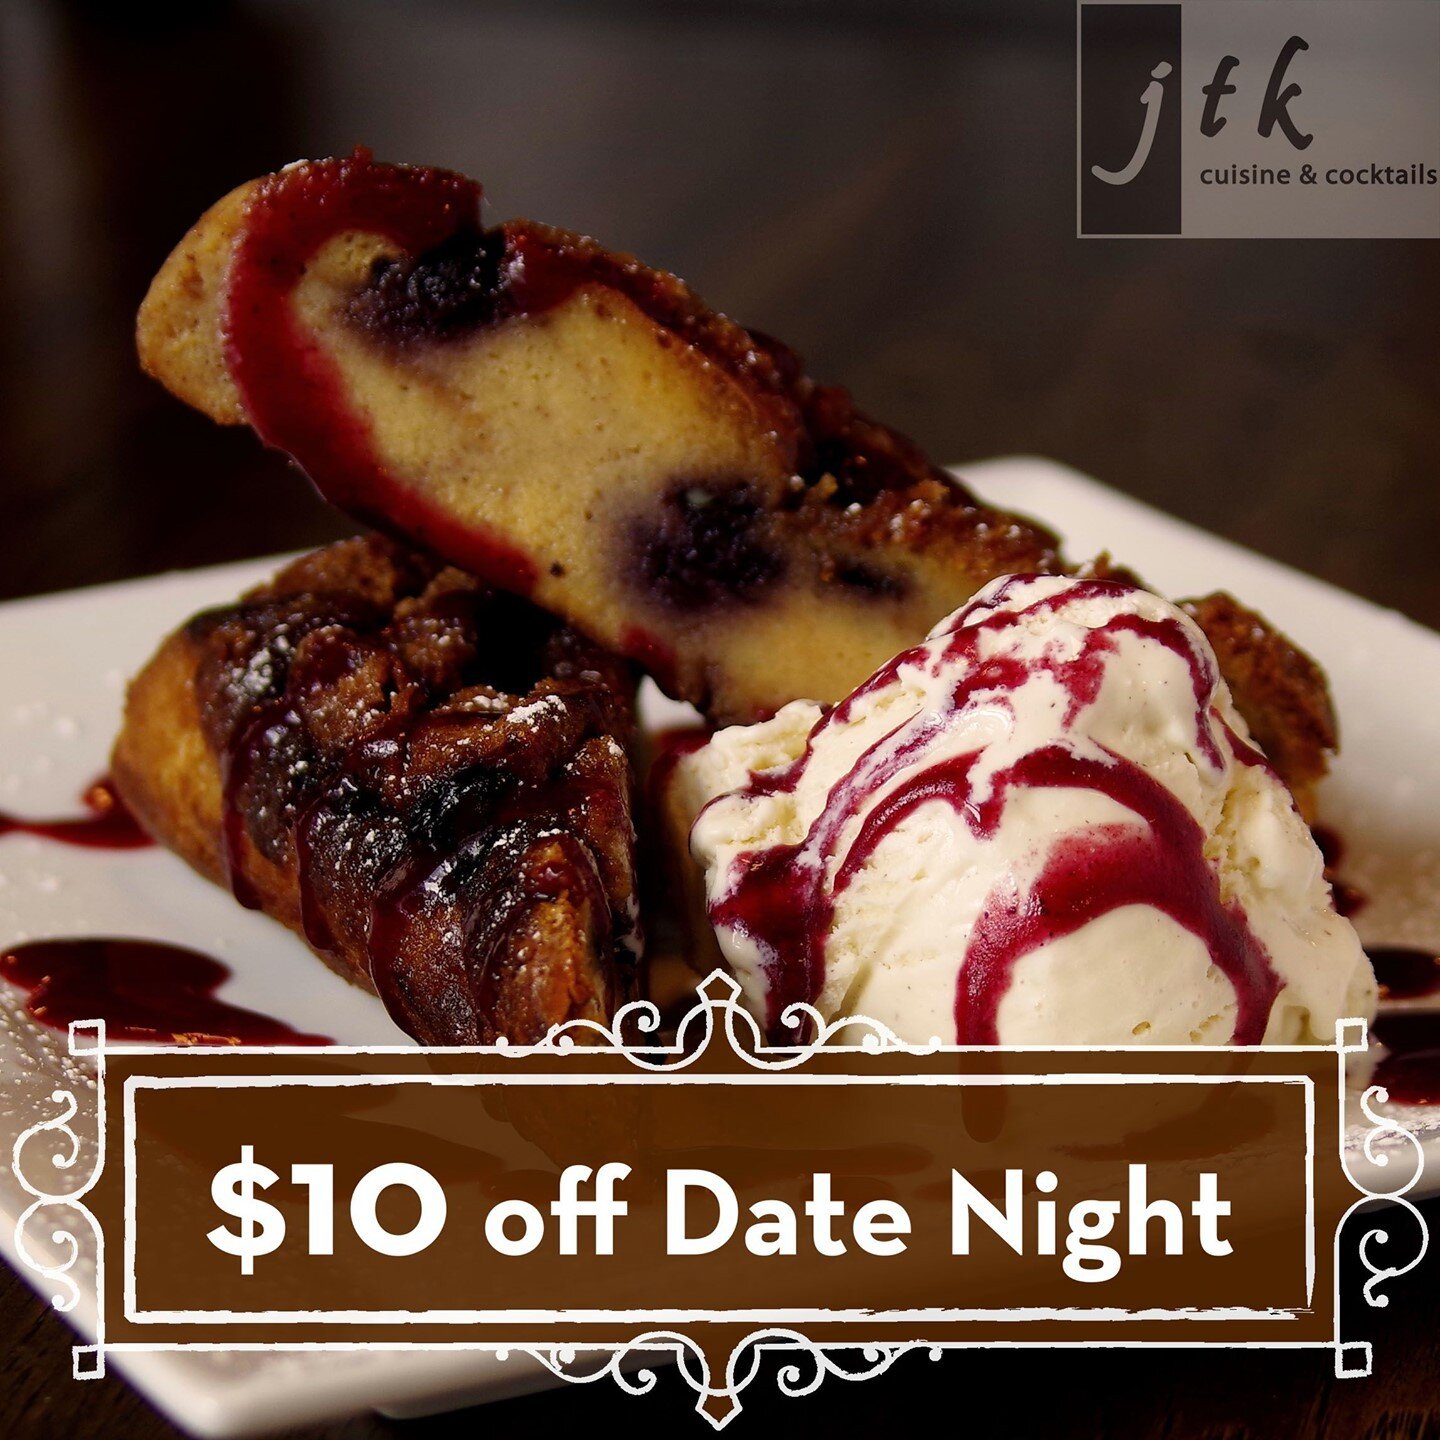 Our Date Night menu is $10 off tonight! Head on down to enjoy a 3 course meal for only $39! (originally $49)⠀⠀⠀
⠀⠀⠀
Also available for take out!⠀⠀⠀
⠀⠀⠀⠀⠀⠀⠀
#haymarketLNK #jtklnk #downtownlincoln #mylnk #lincolnhaymarket #restaurant #dessert #breadpud